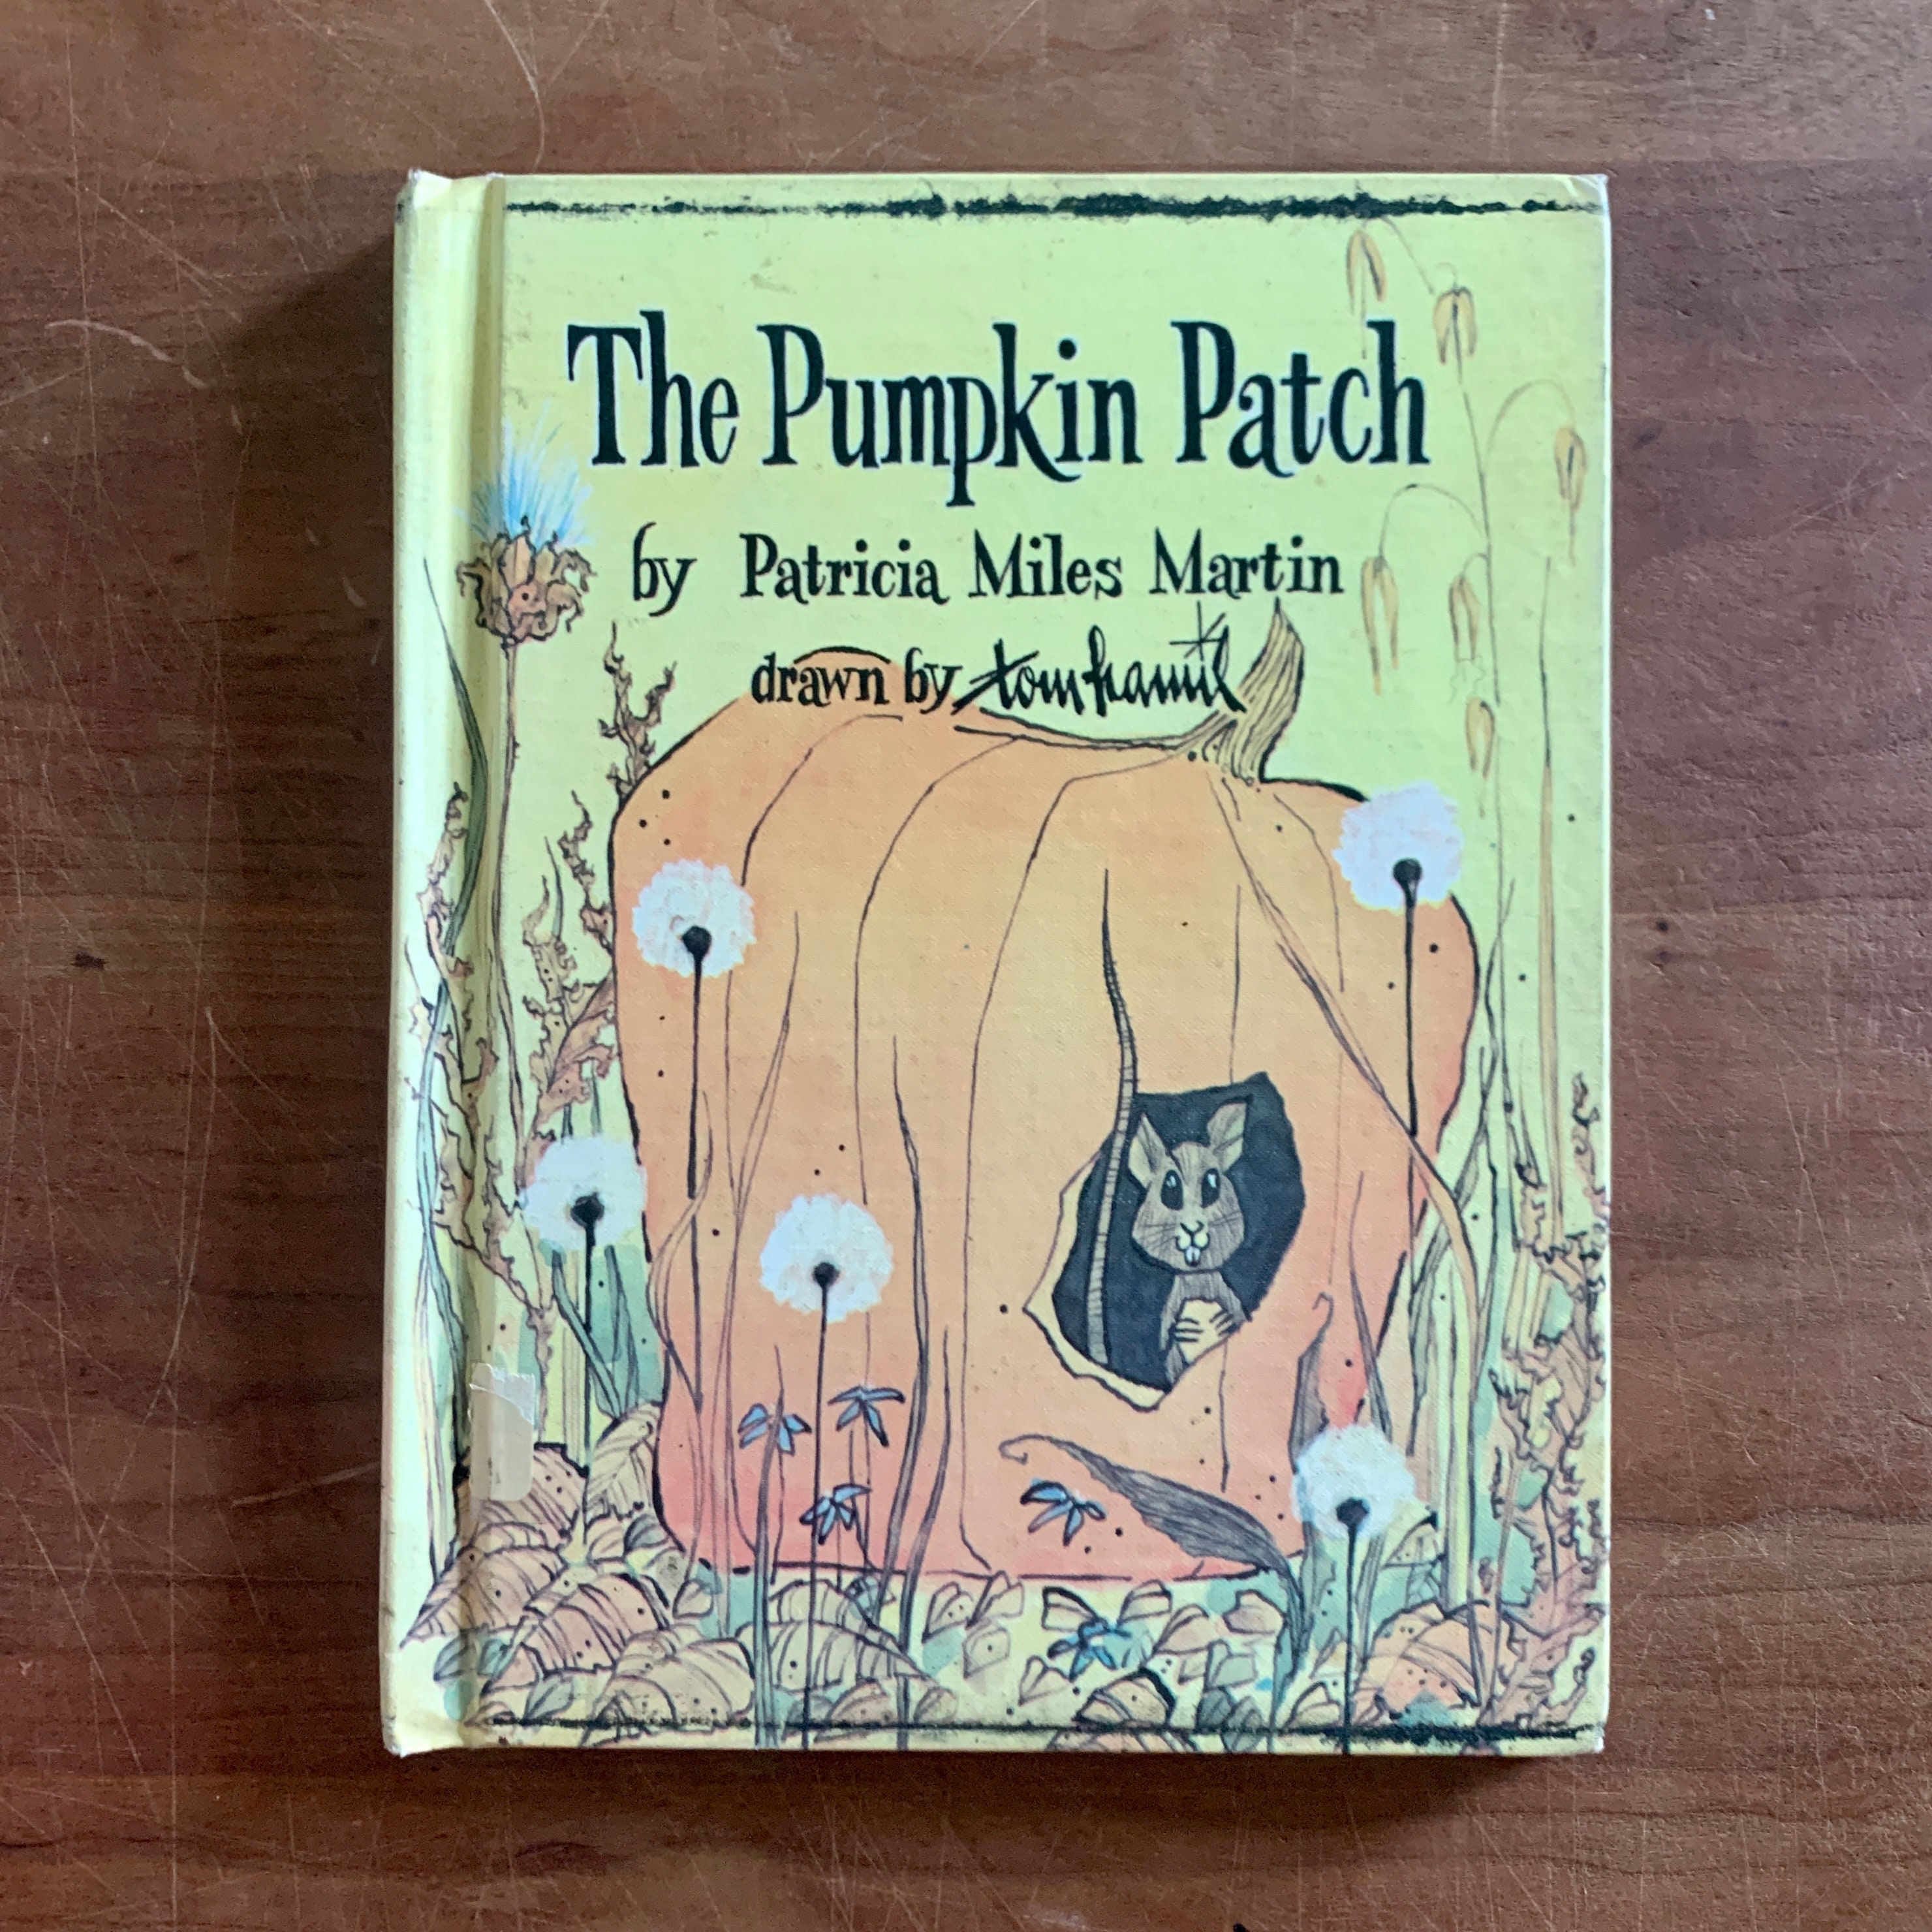 The Pumpkin Patch by Patricia Miles Martin Drawn by picture